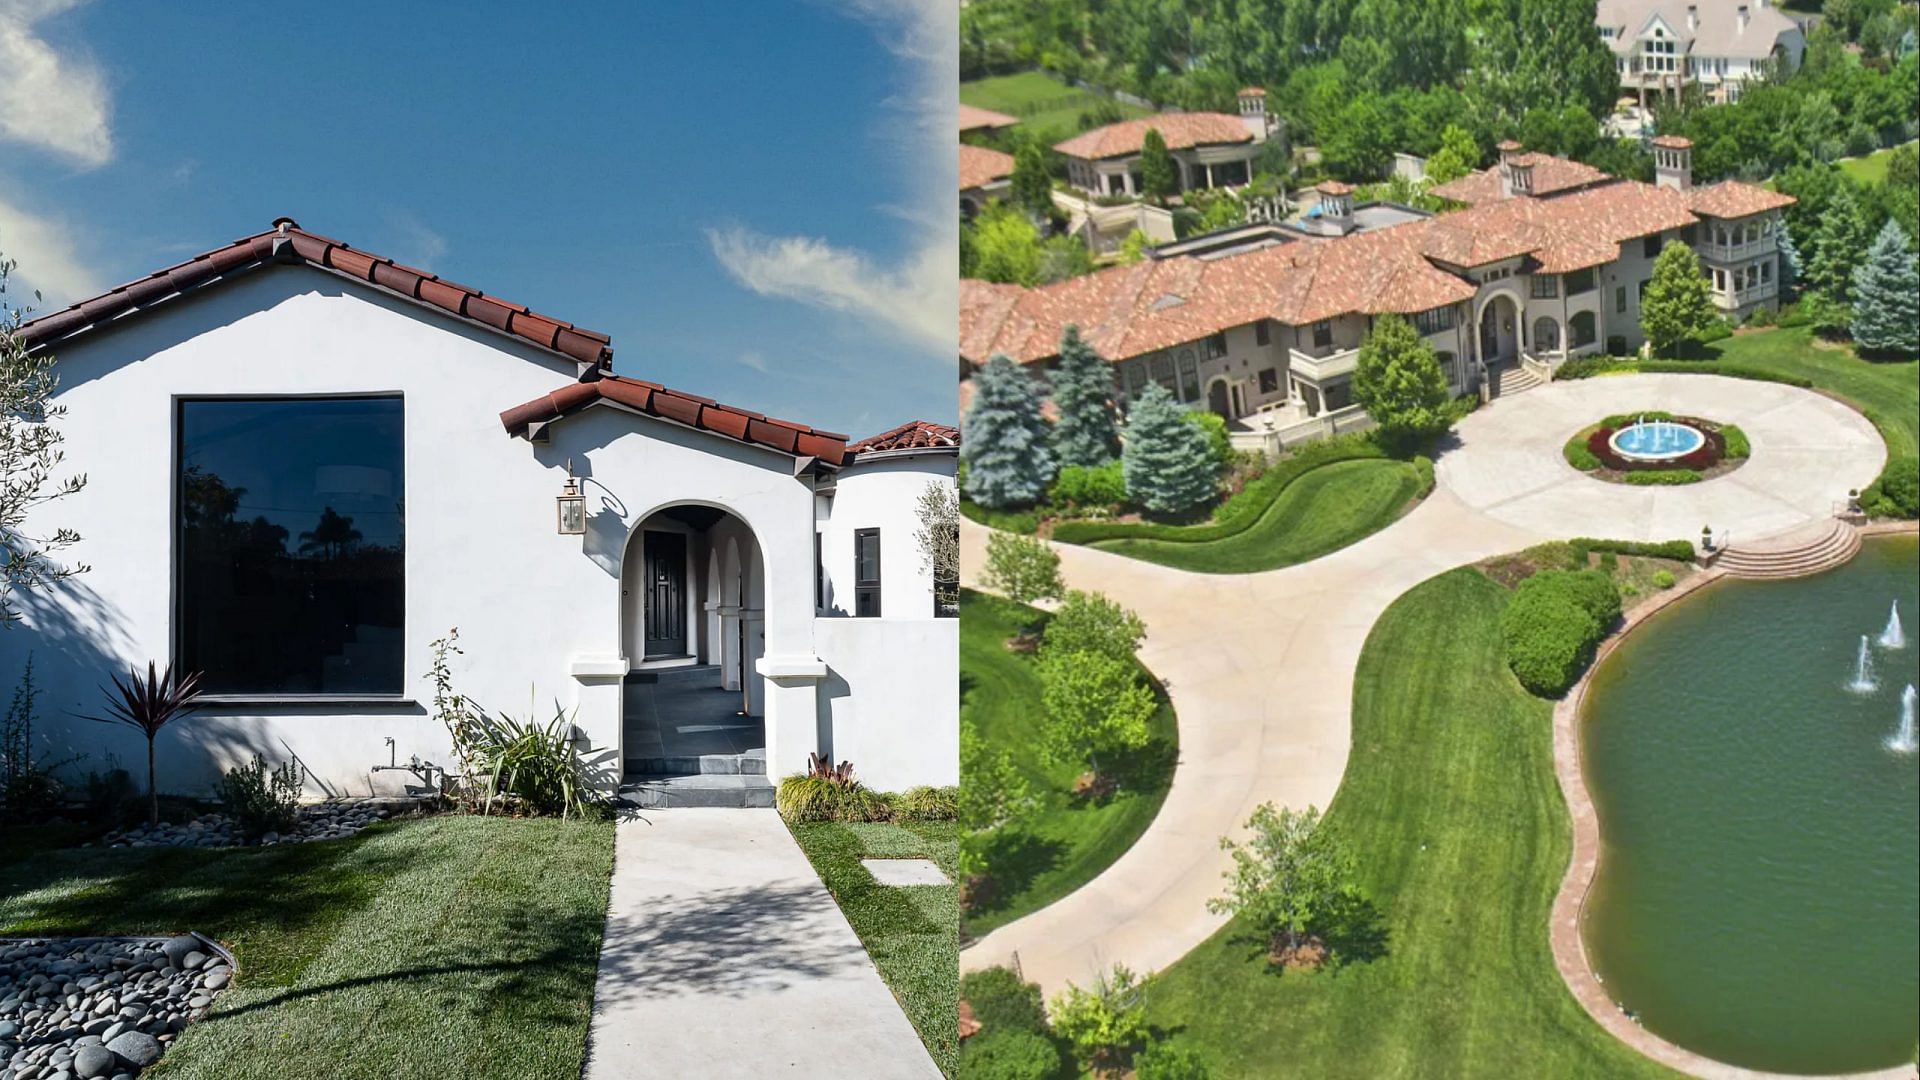 Houses owned by Carmelo Anthony